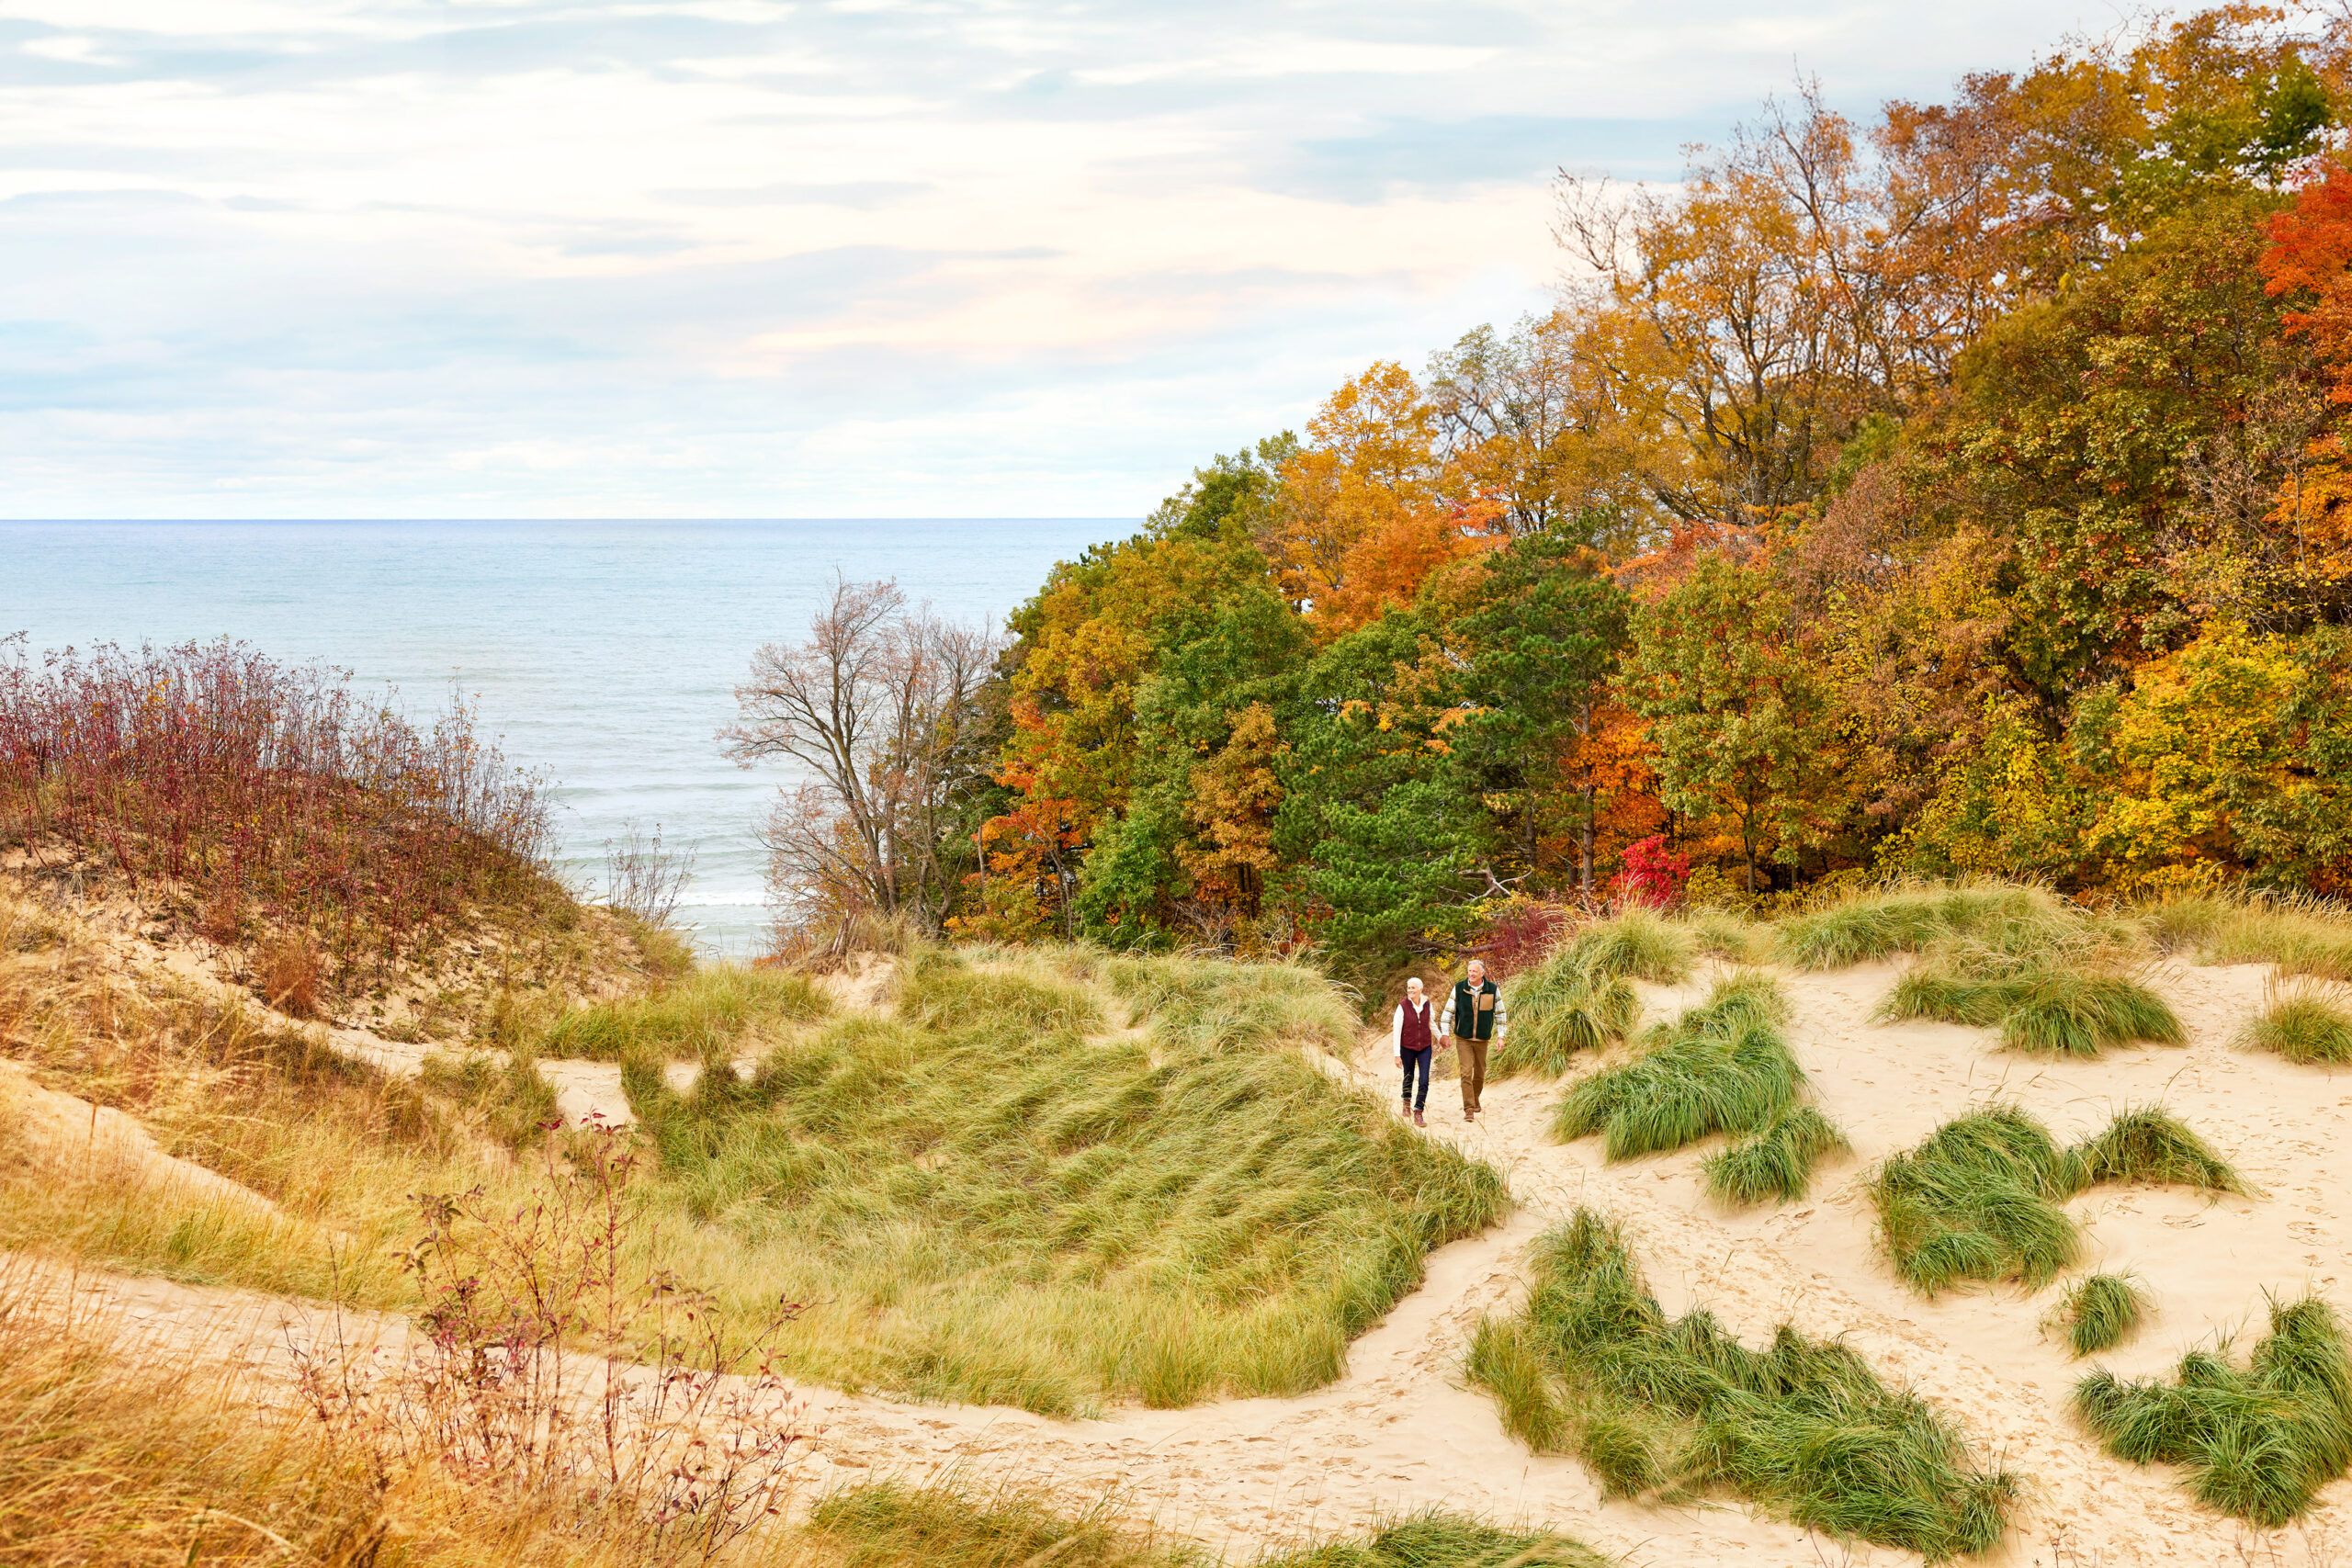 A couple walking the hills of Laketown Beach in the fall.